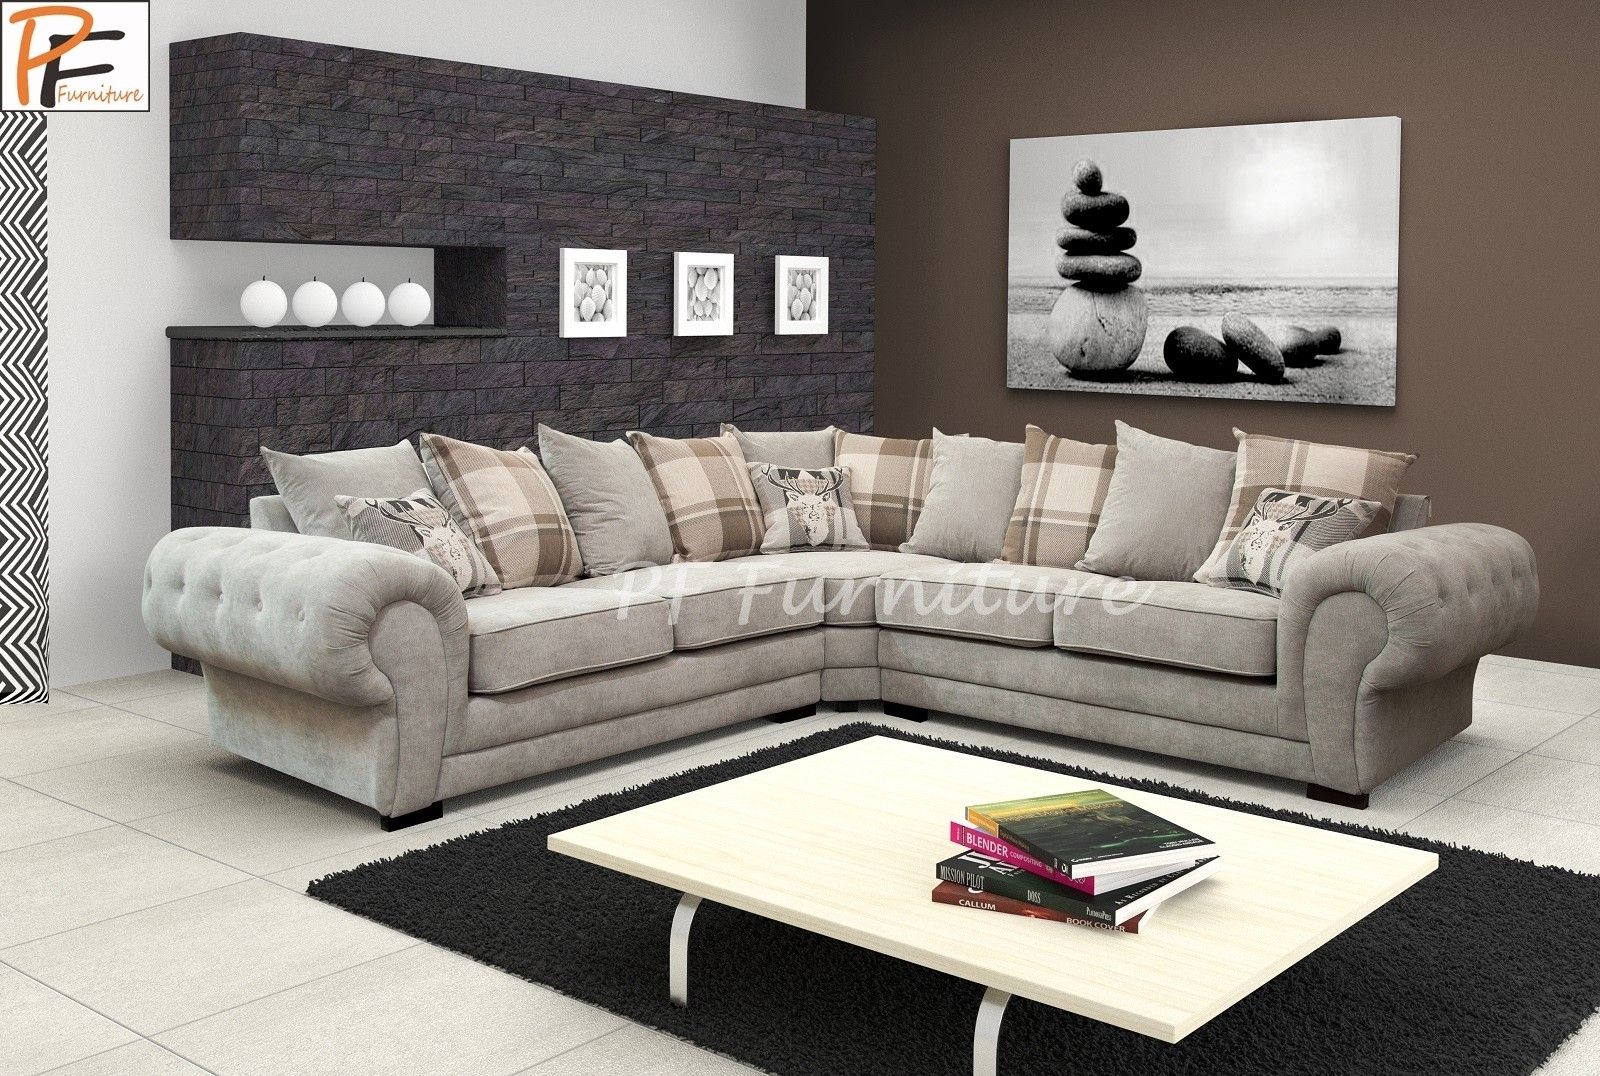 How To Decorate Your Living Room With Fabric Corner Sofa Within Fabric Corner Sofas (View 1 of 10)